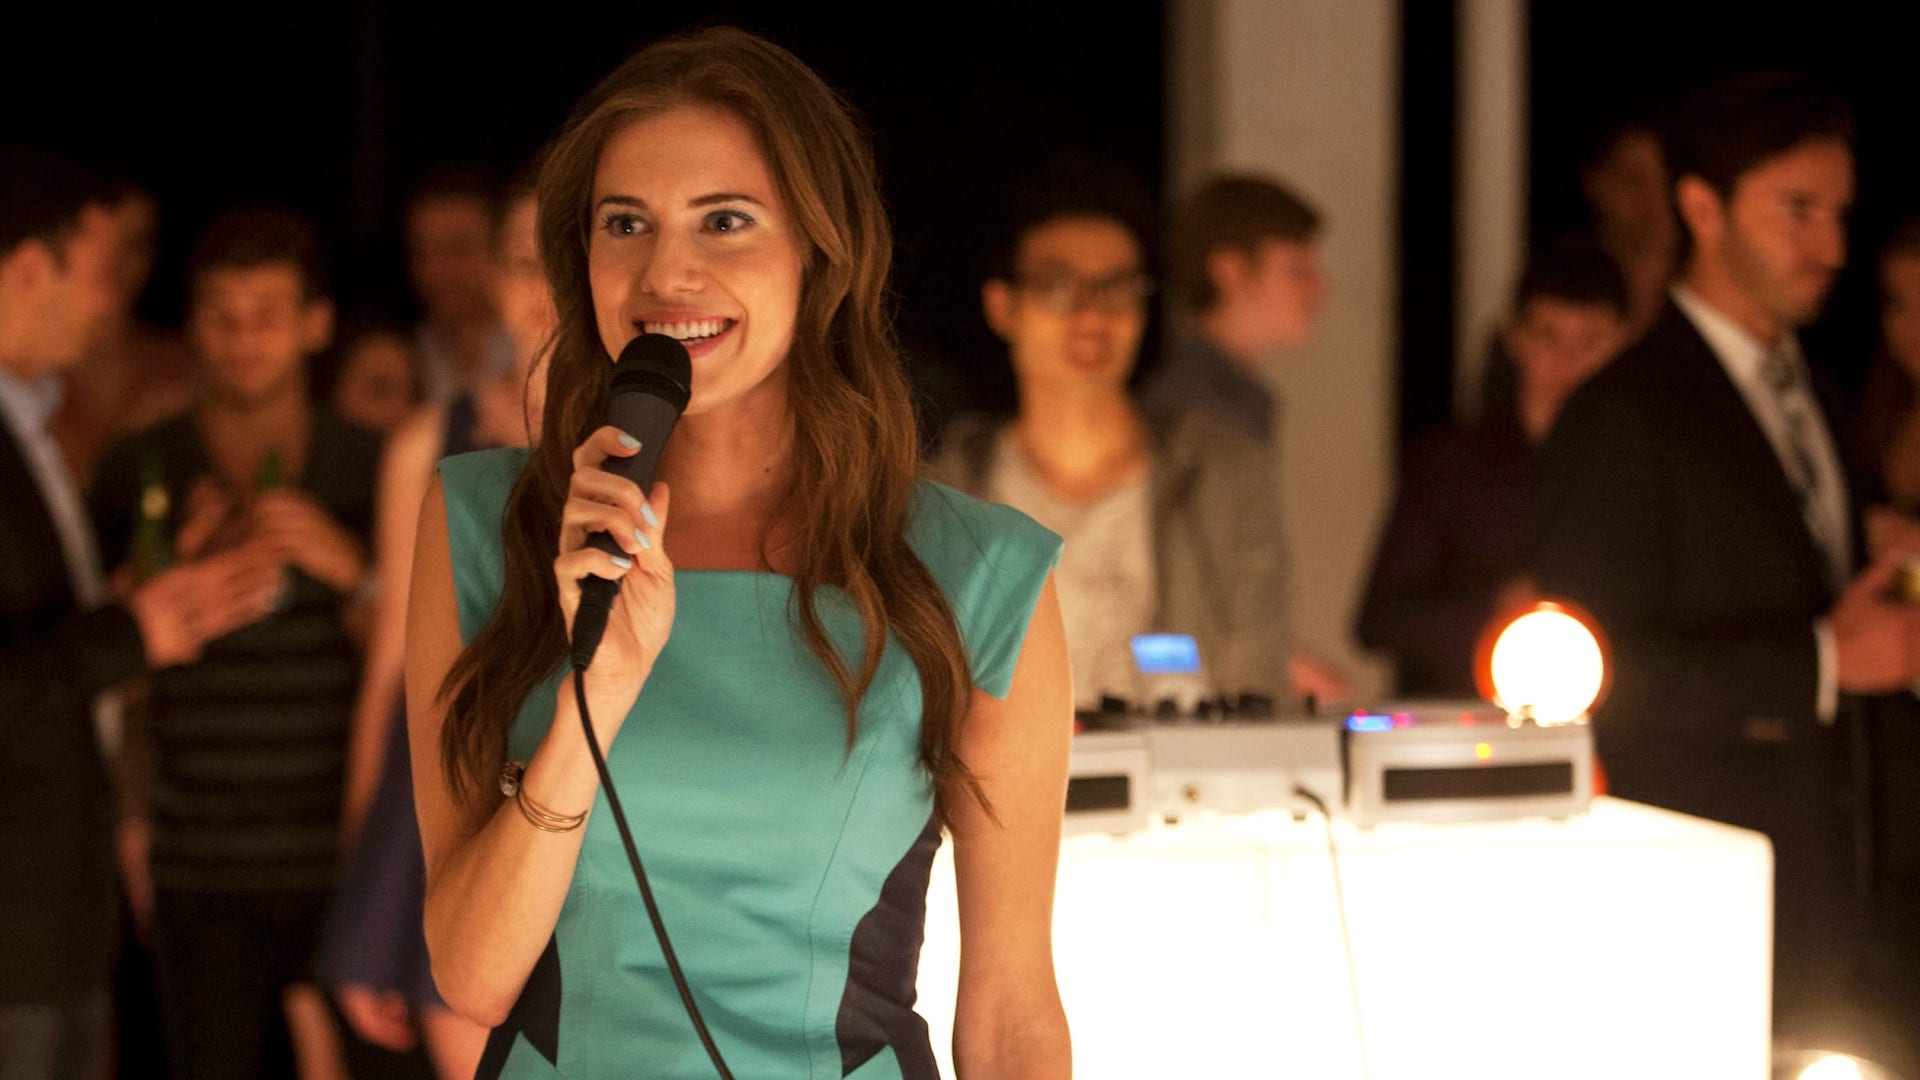 Allison Williams as Marnie covering Kanye West's "Stronger" on "Girls"